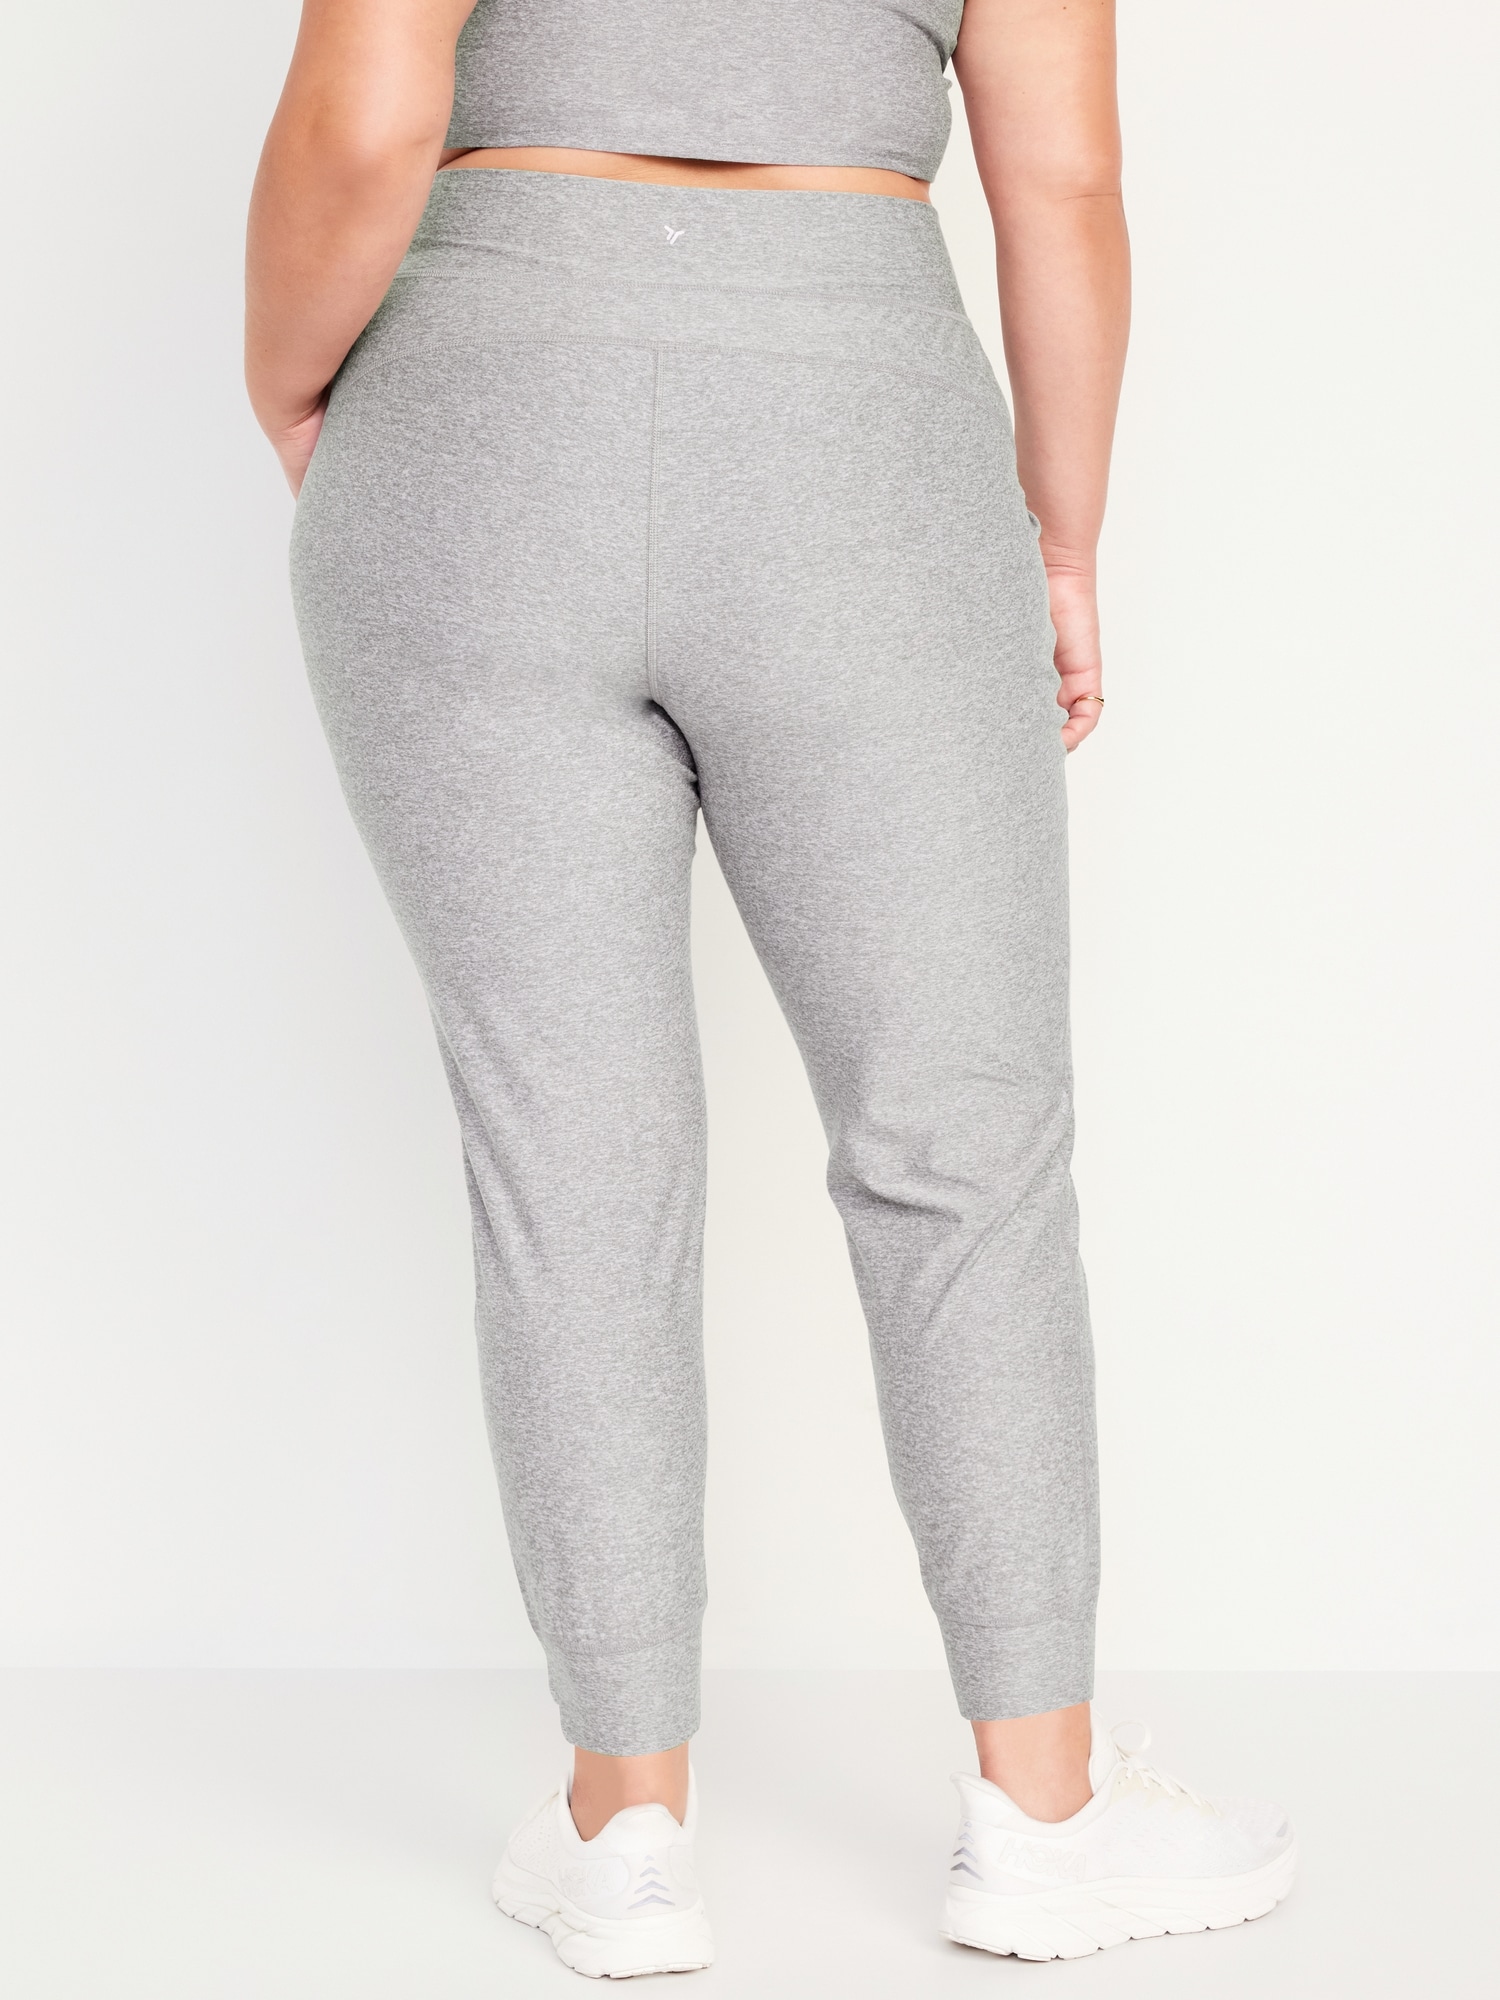 Old Navy Cloud+ Leggings on Sale! Just $10 TODAY!